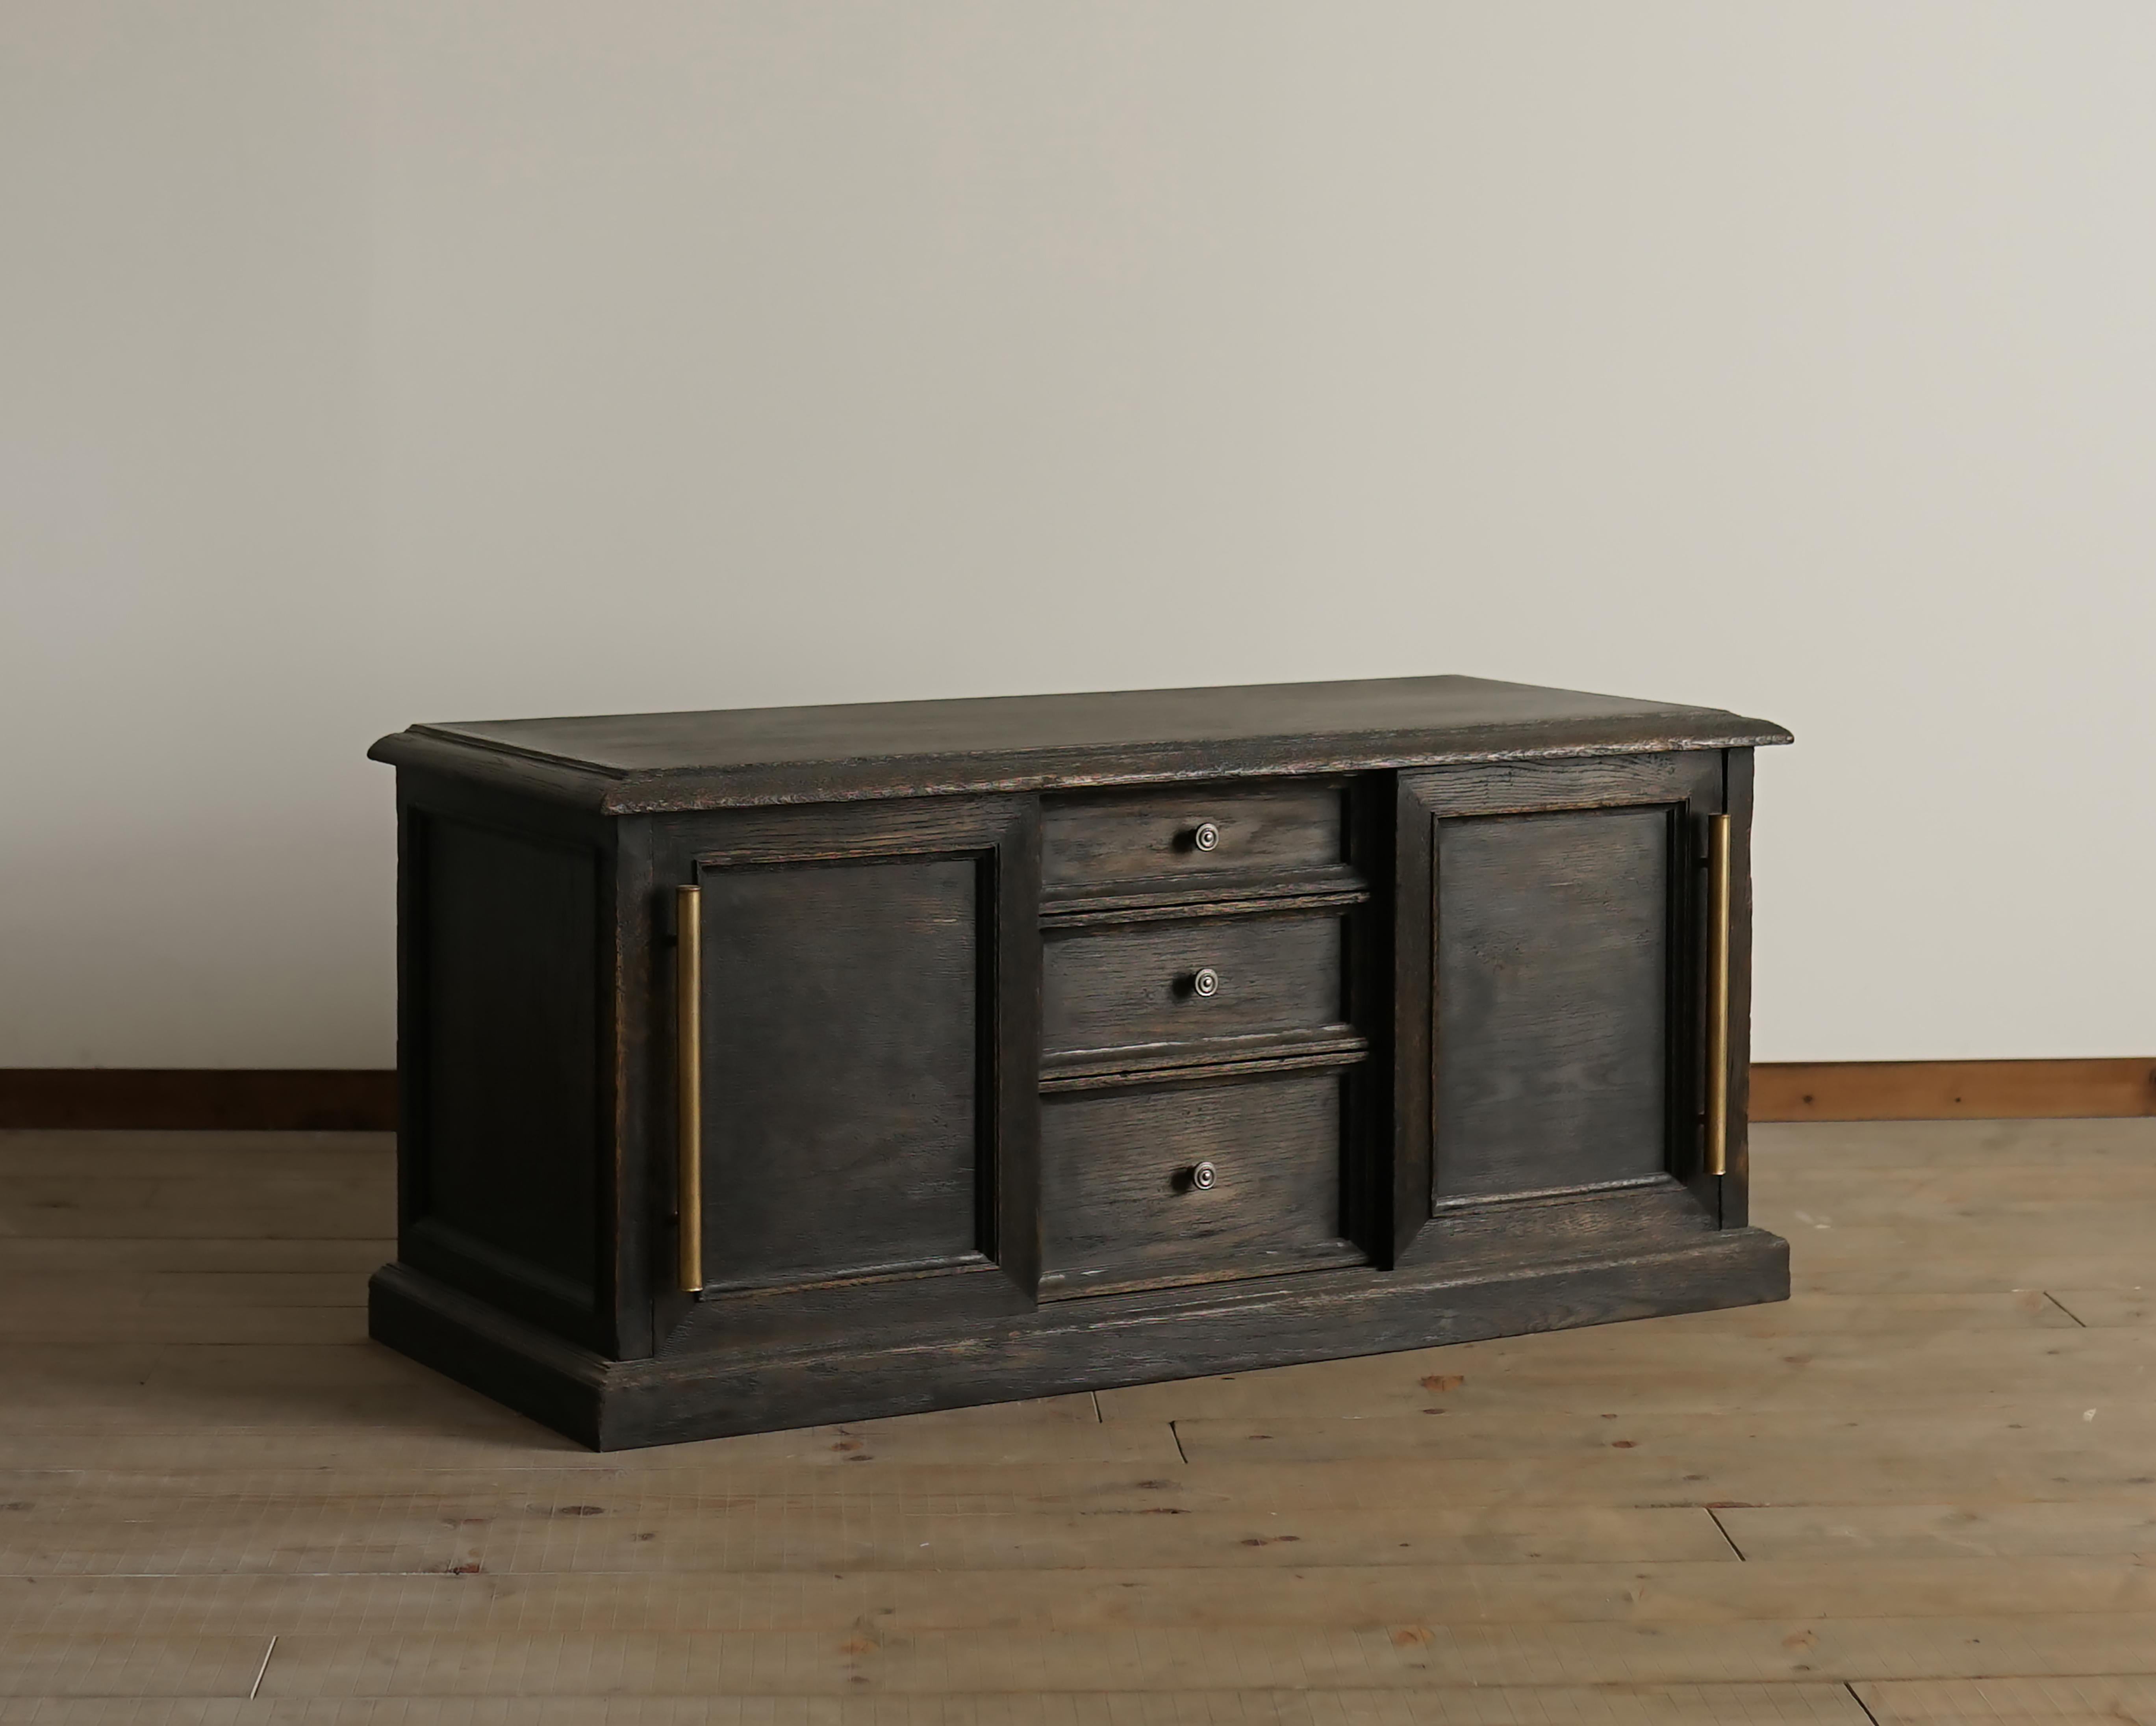 This is a sideboard that 